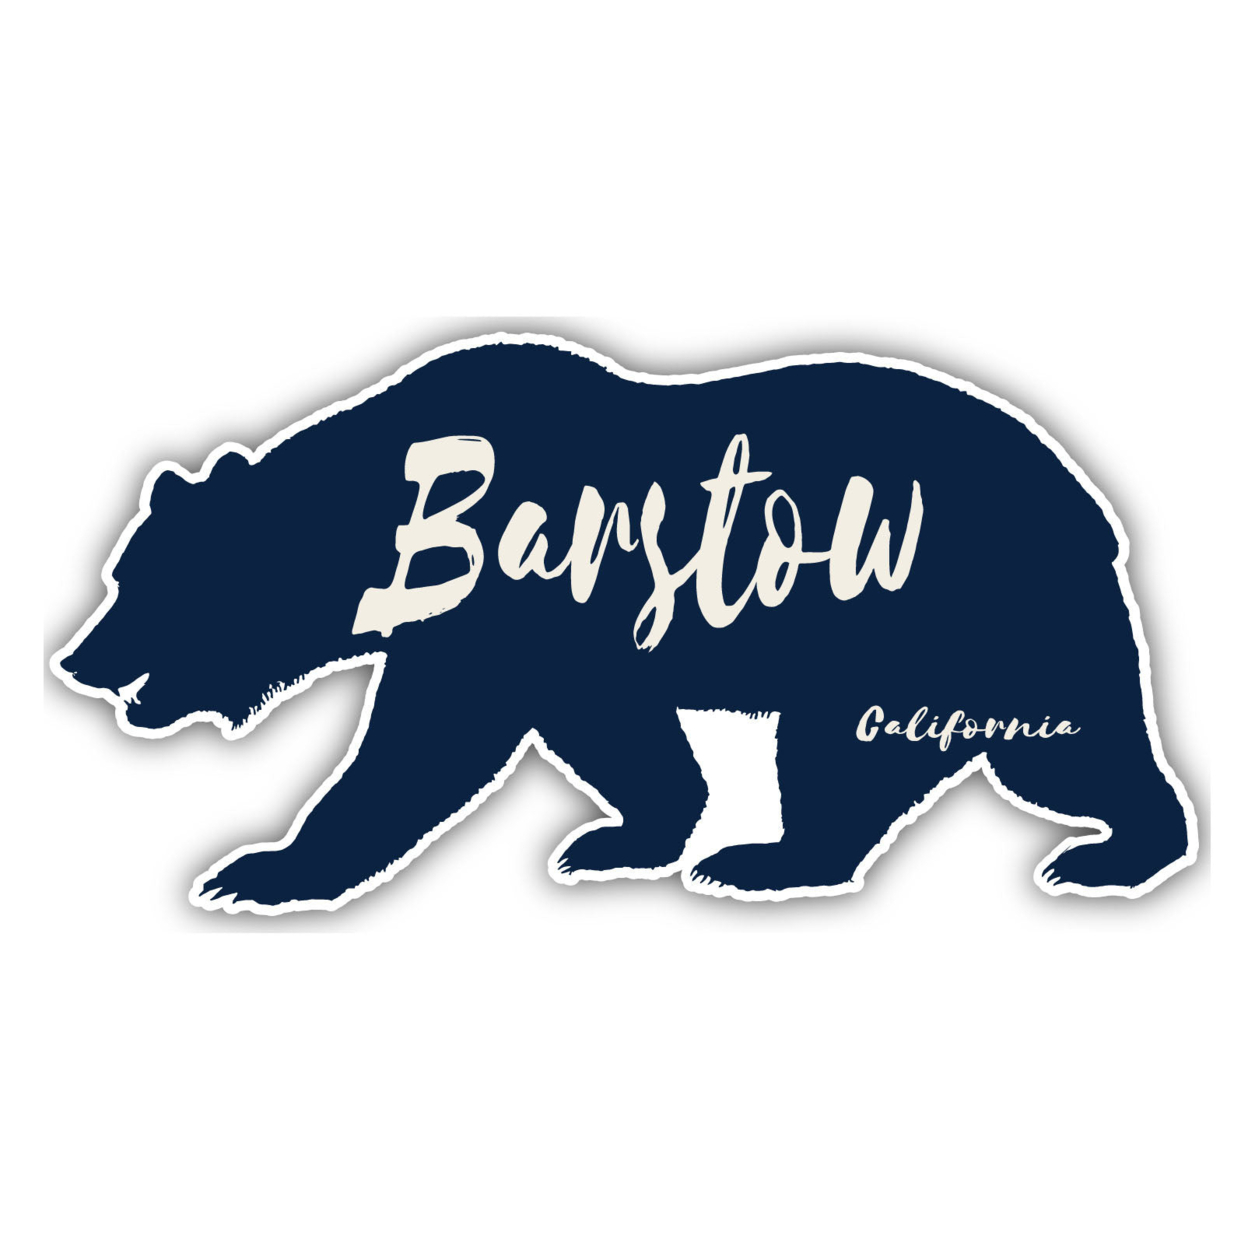 Barstow California Souvenir Decorative Stickers (Choose Theme And Size) - 4-Pack, 12-Inch, Bear